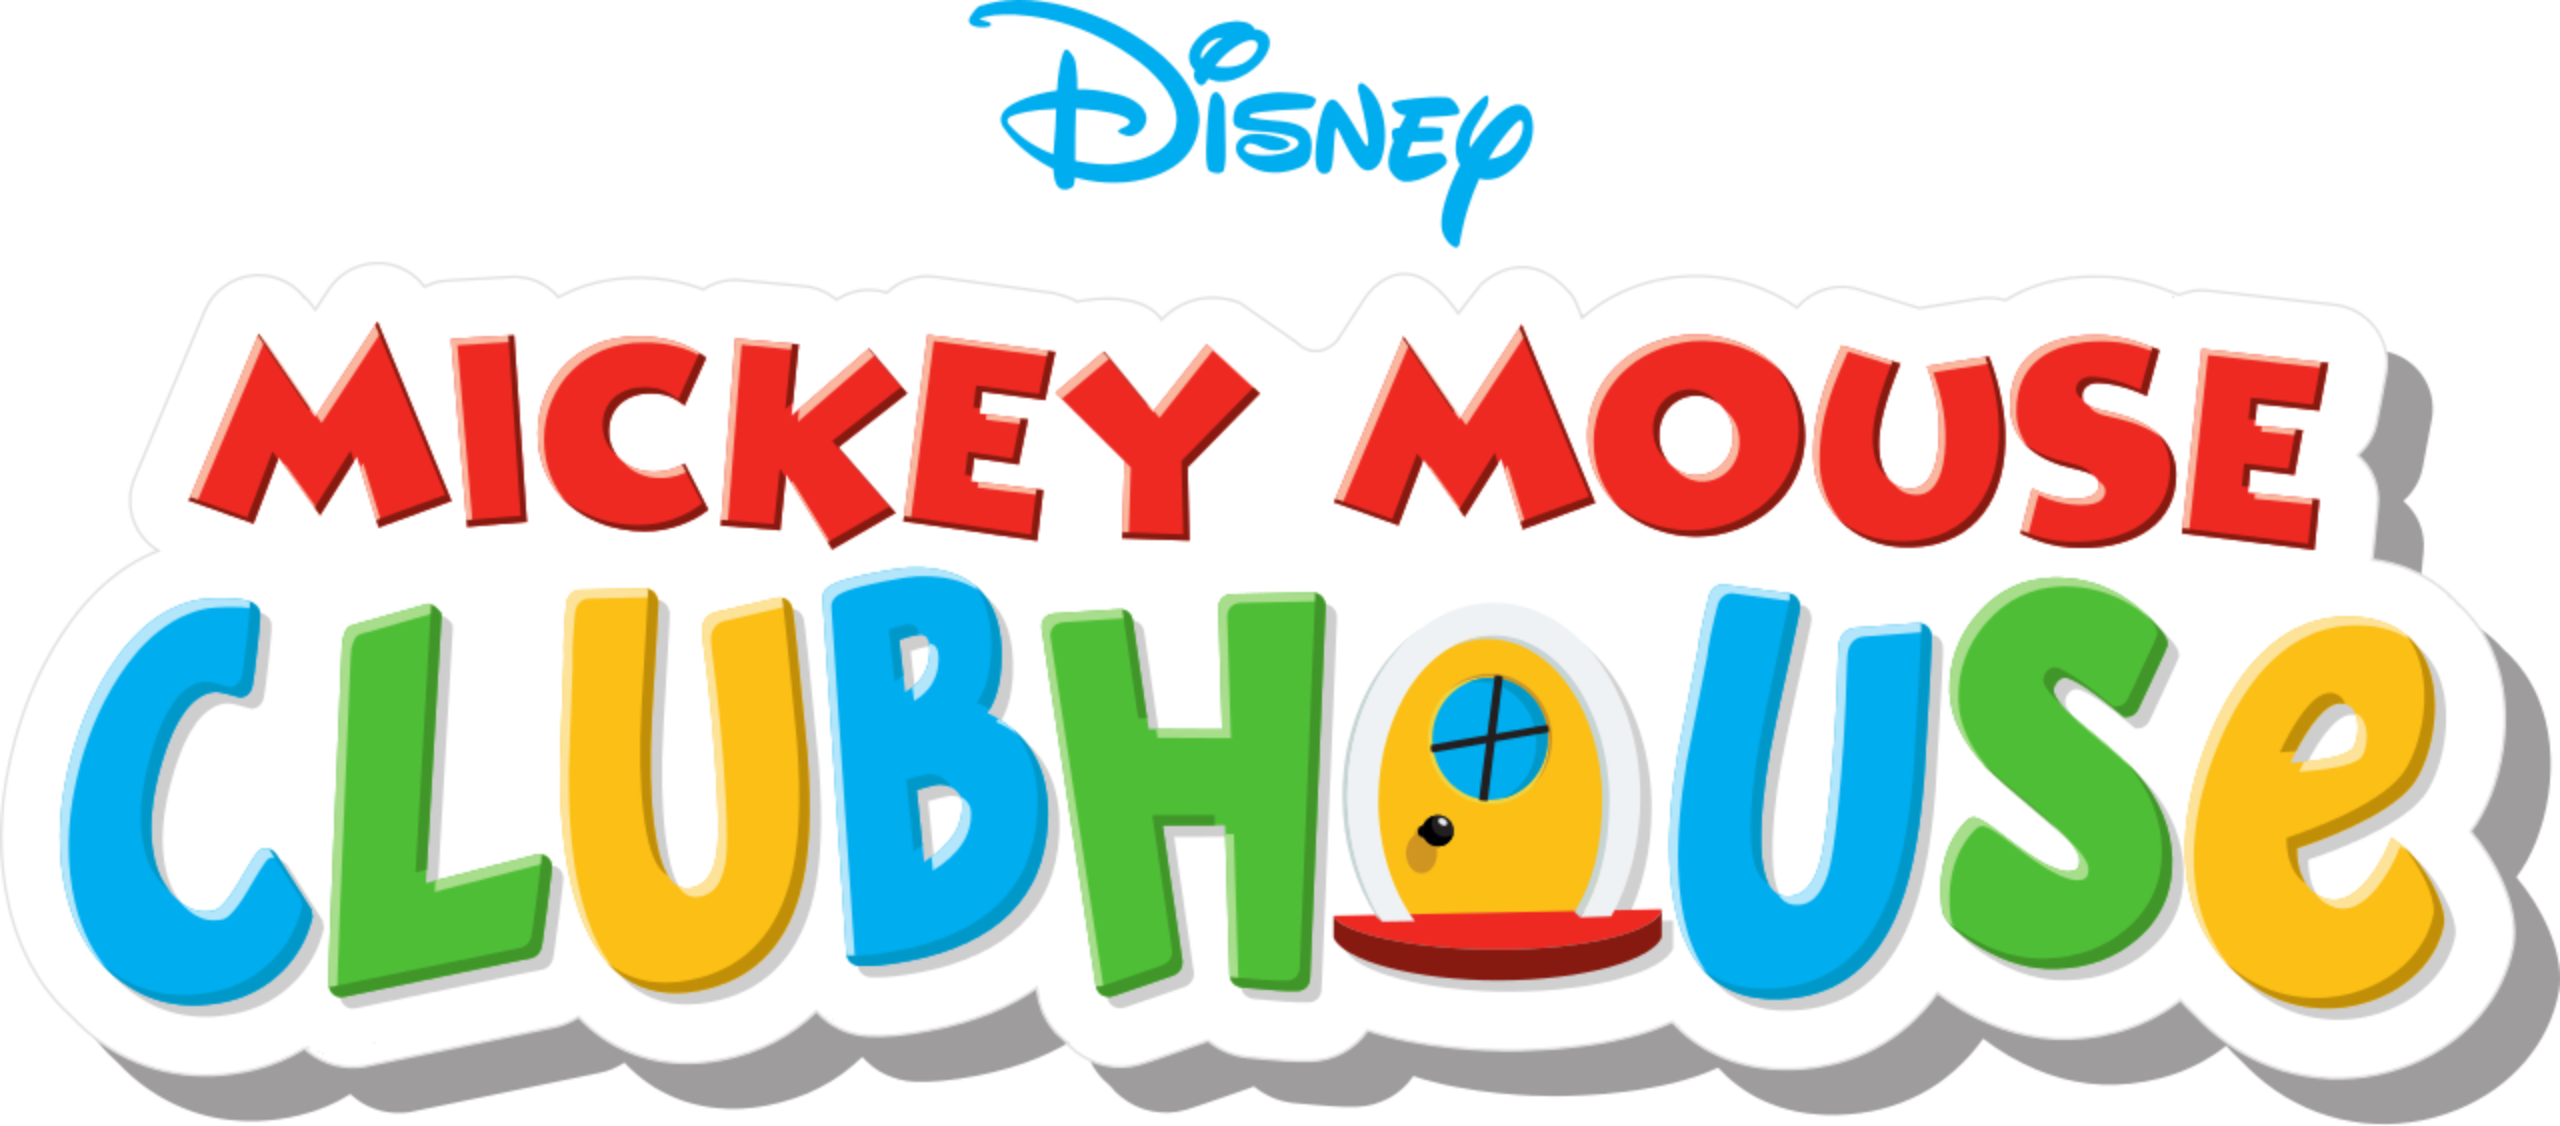 Mickey Mouse Clubhouse Volume 1 (6 DVDs Box Set)